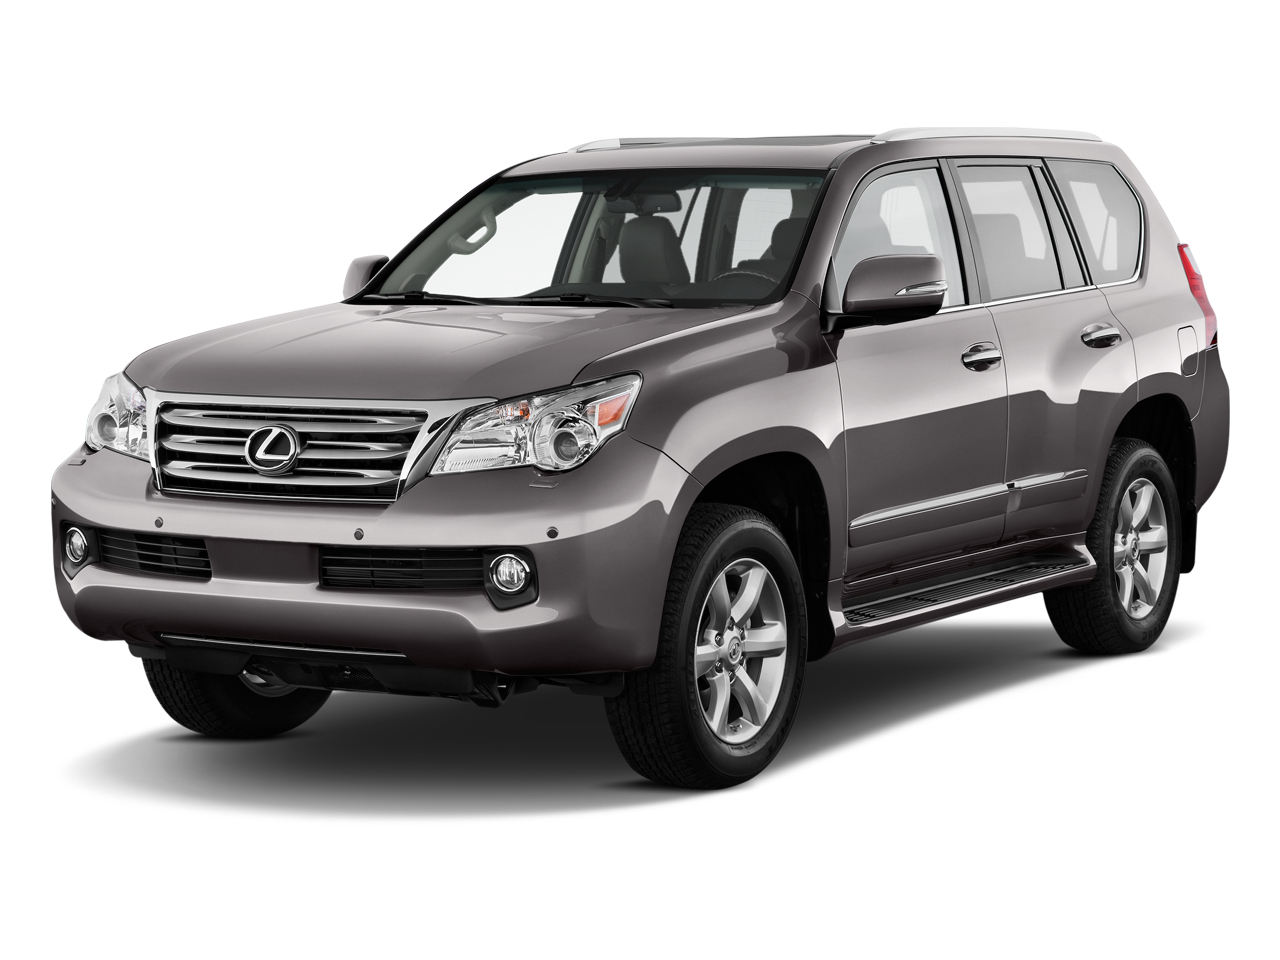 2010 Lexus GX Review, Ratings, Specs, Prices, and Photos - The Car ...